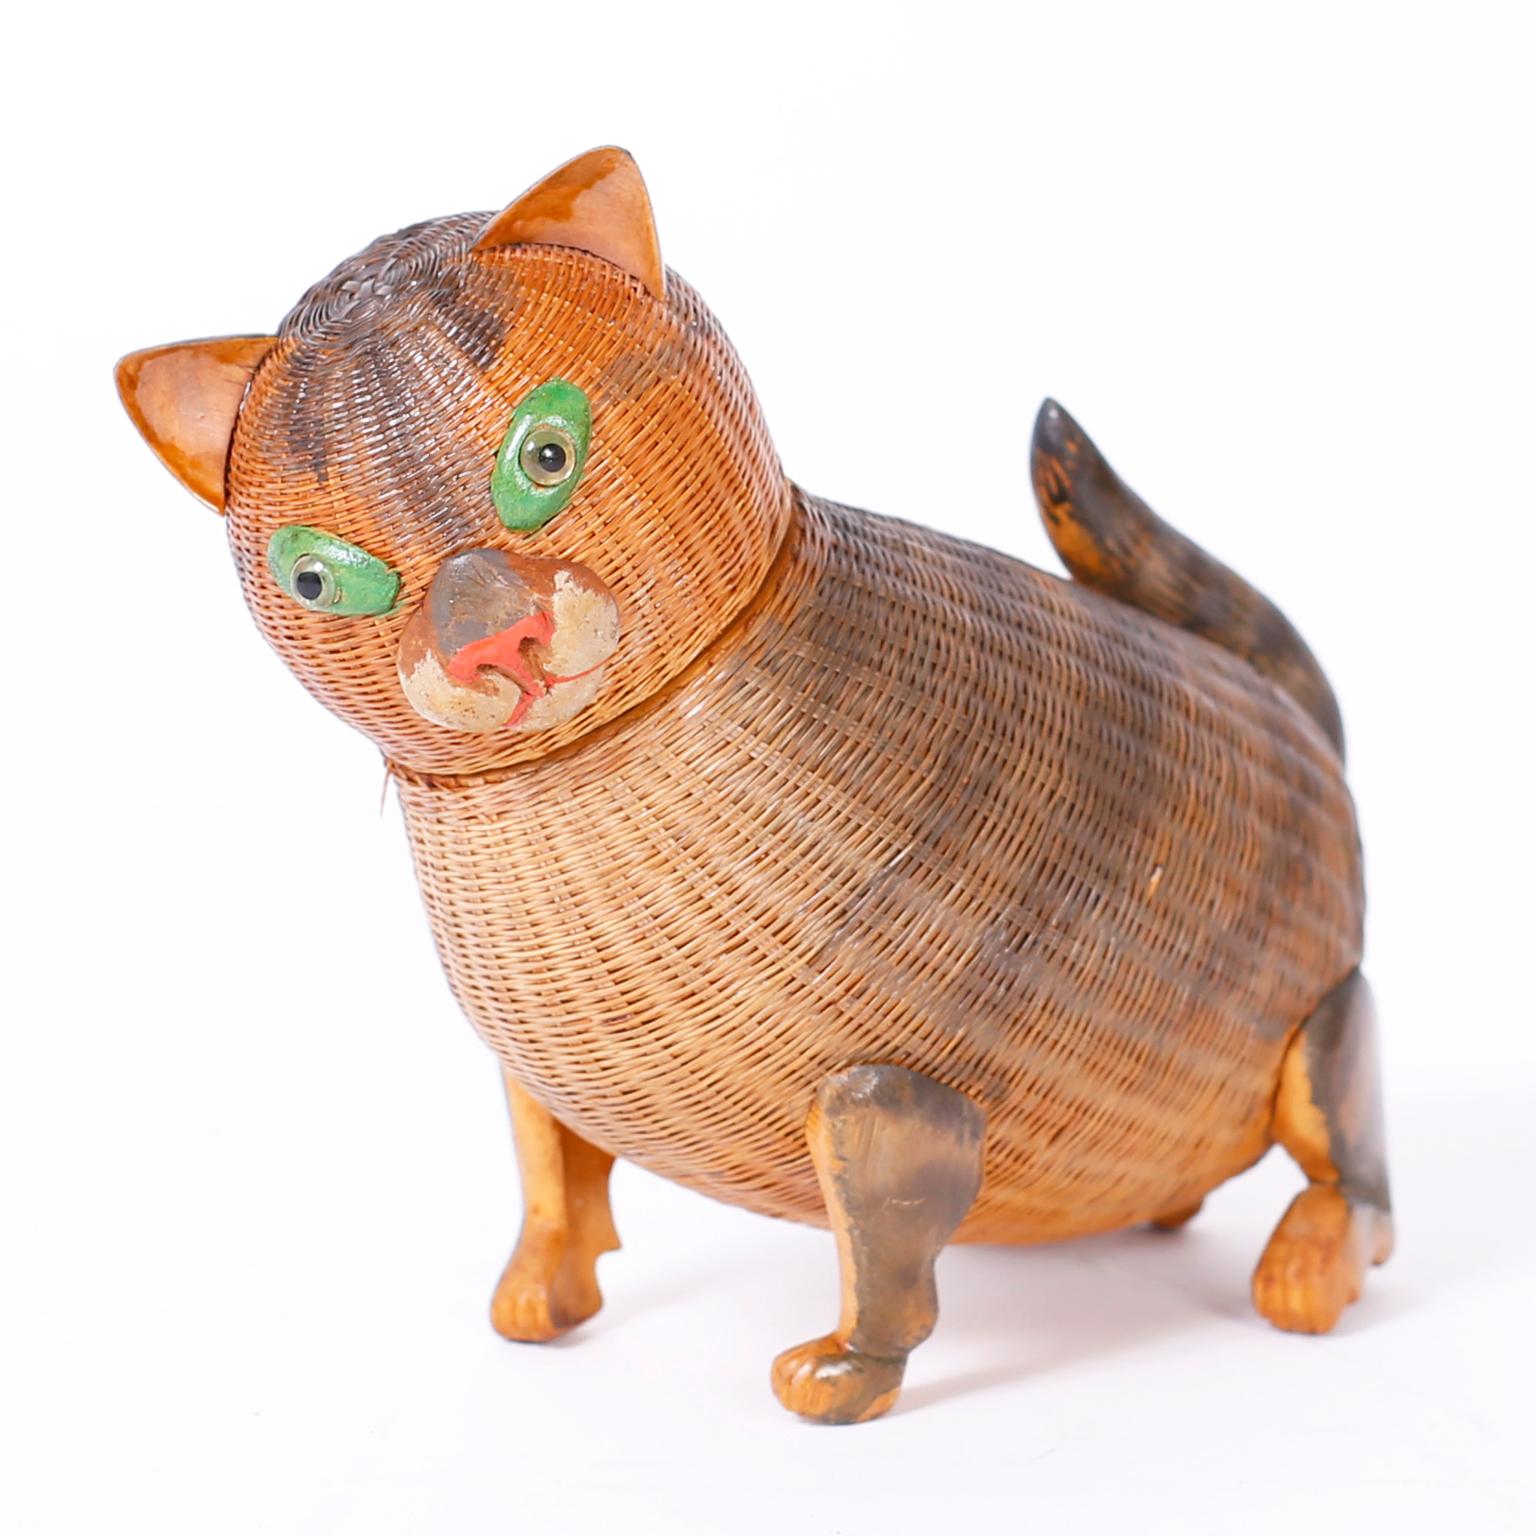 Delightful Chinese wicker kitten box from the noted Shanghai collection with a woven reed construction, carved wood legs, ears, nose and painted highlights. Removable head reveals hidden storage.